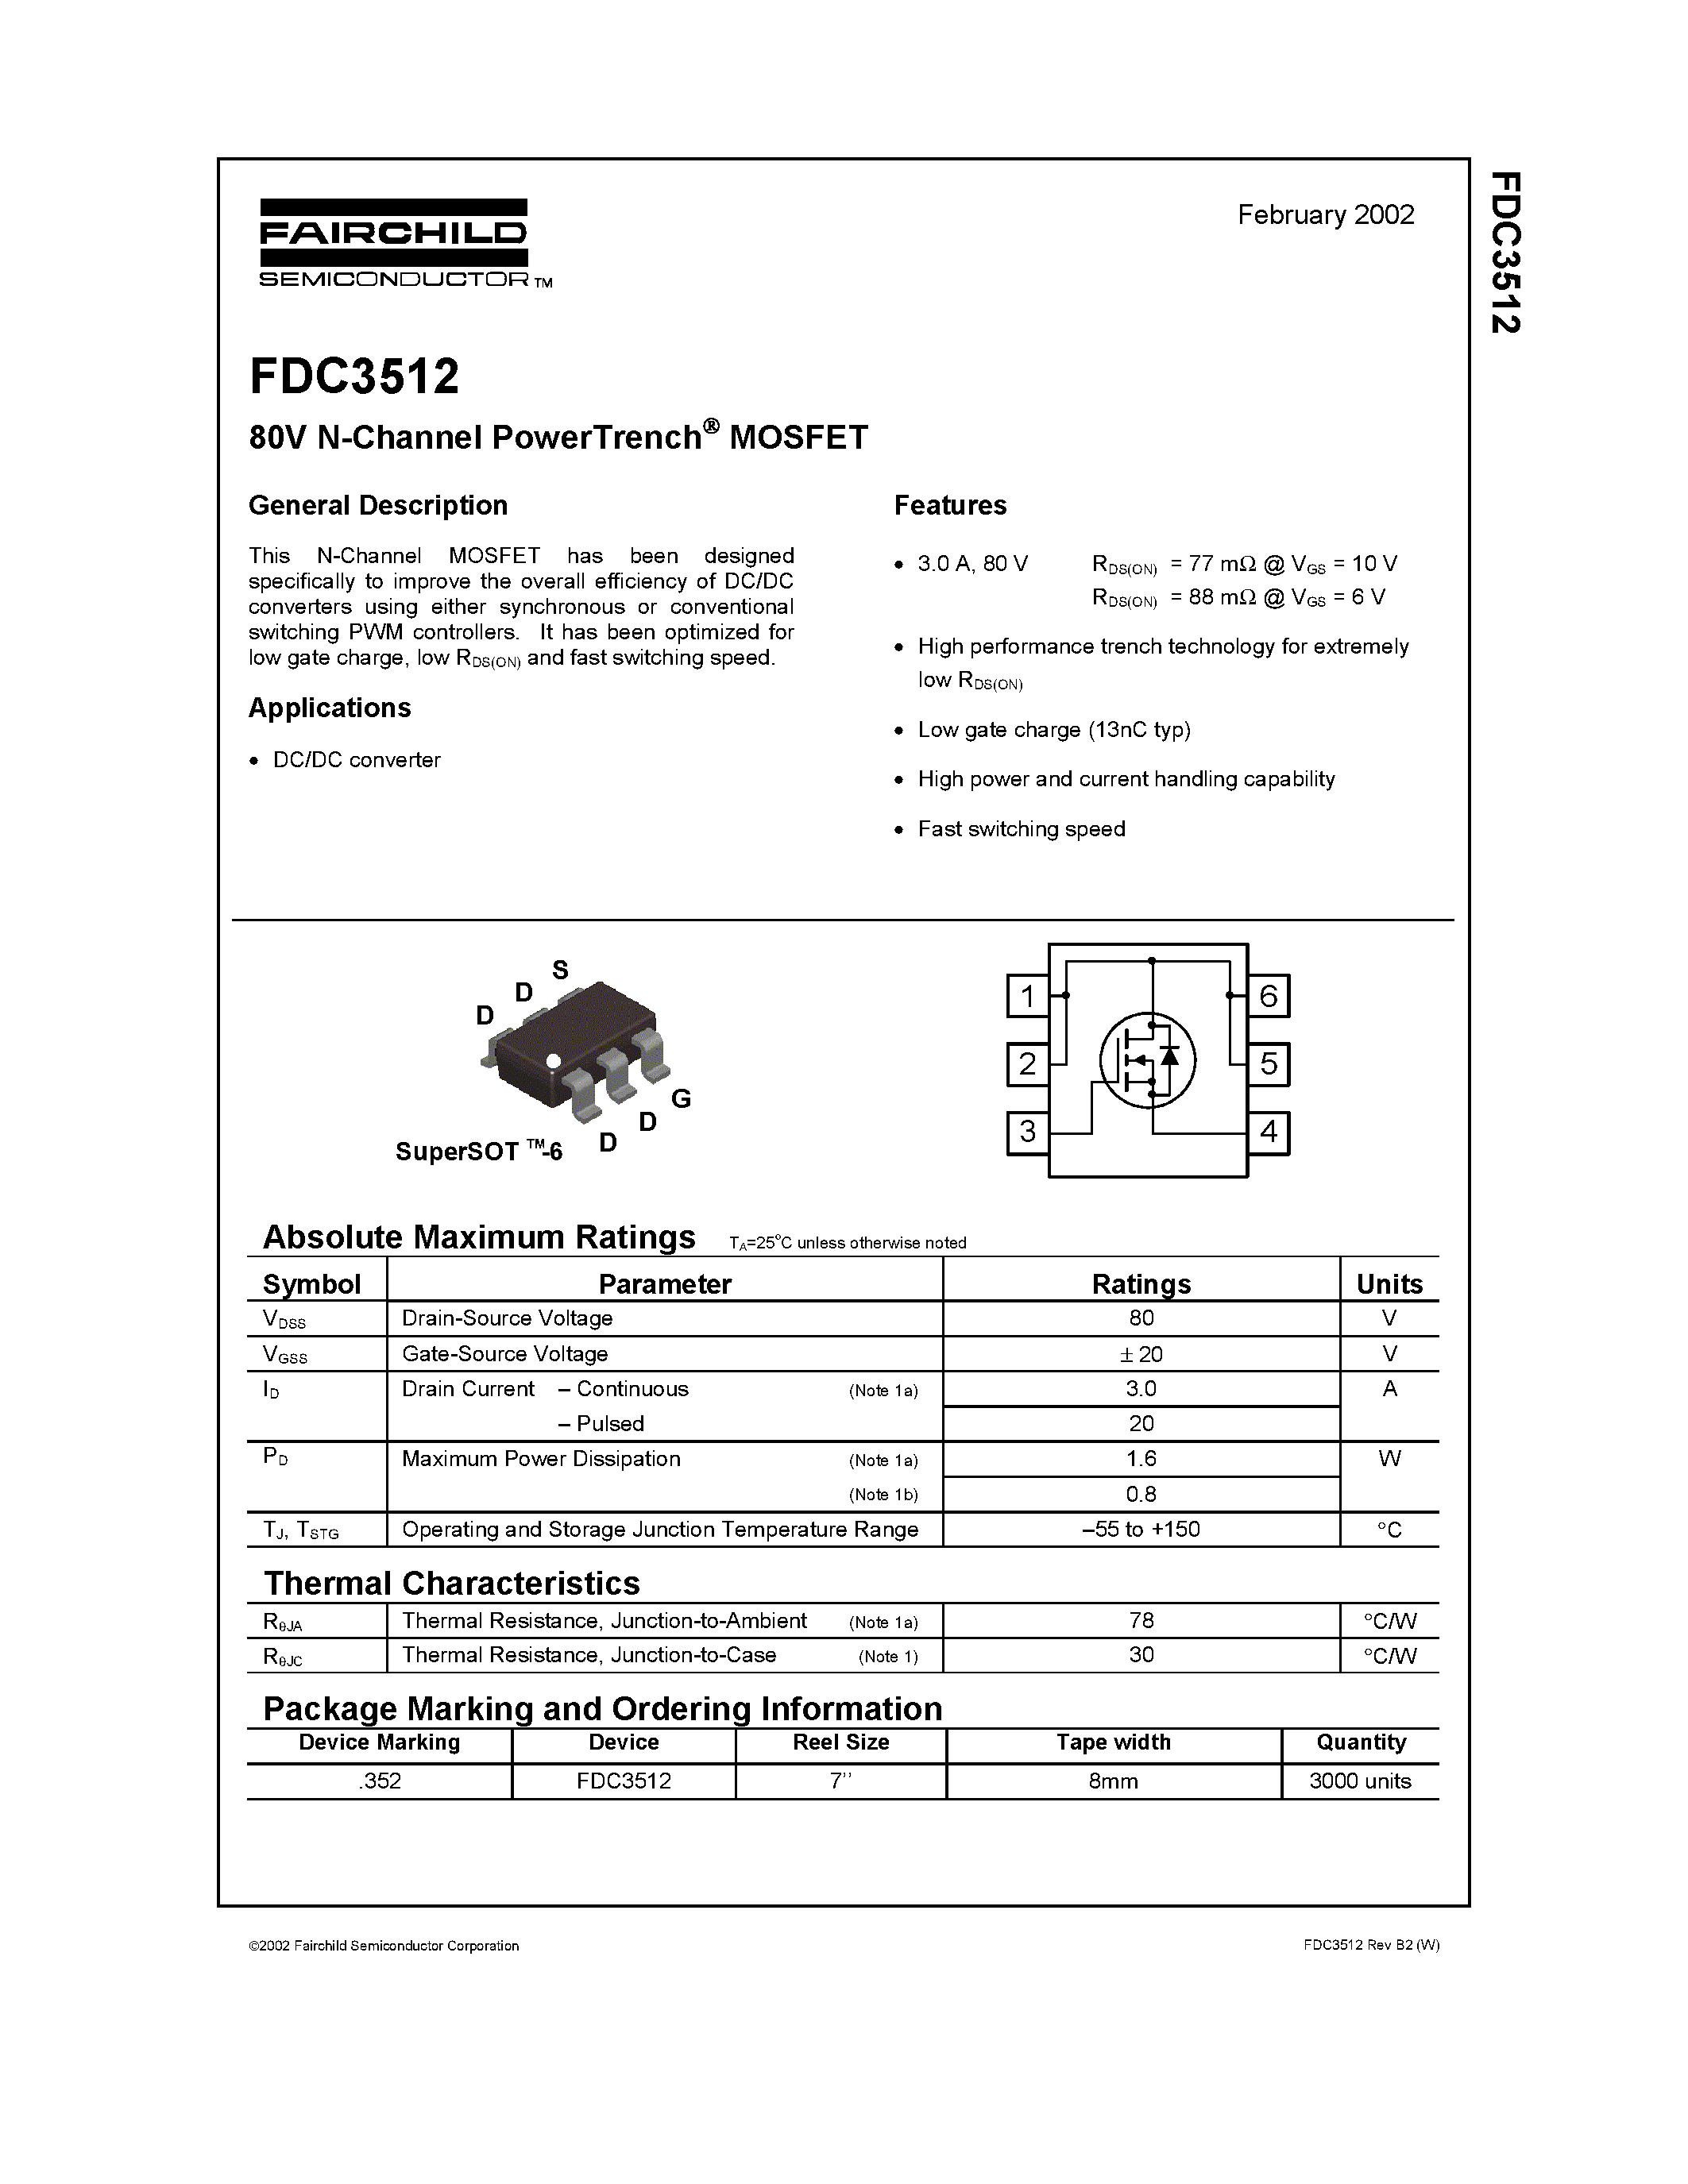 Datasheet FDC3512 - 80V N-Channel PowerTrench MOSFET page 1